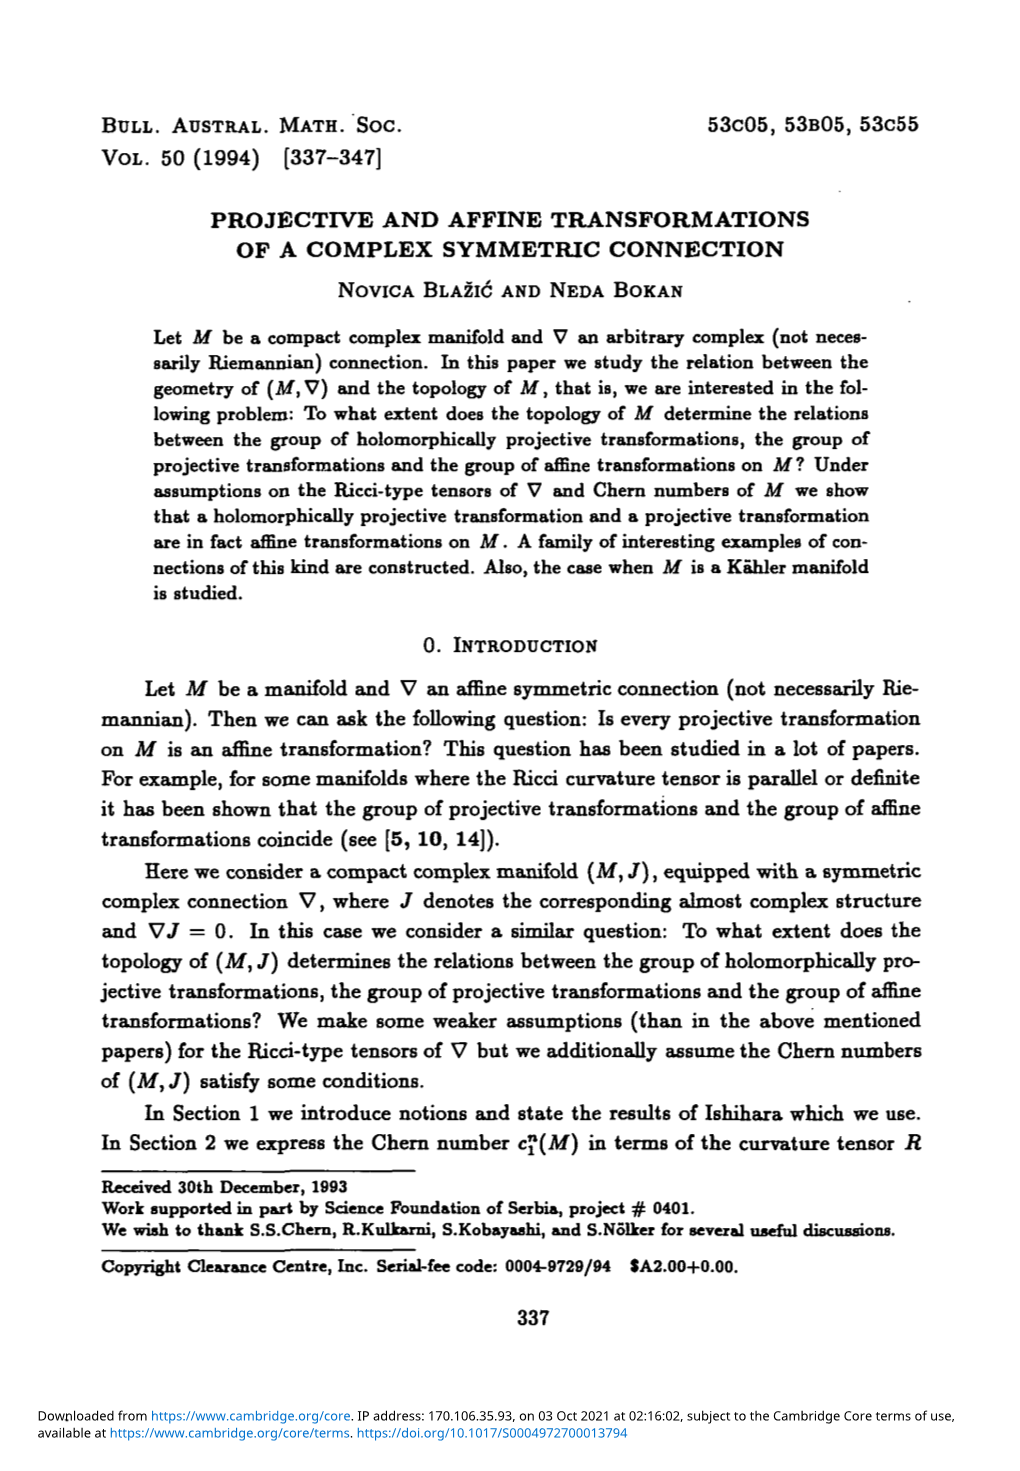 Projective and Affine Transformations of a Complex Symmetric Connection